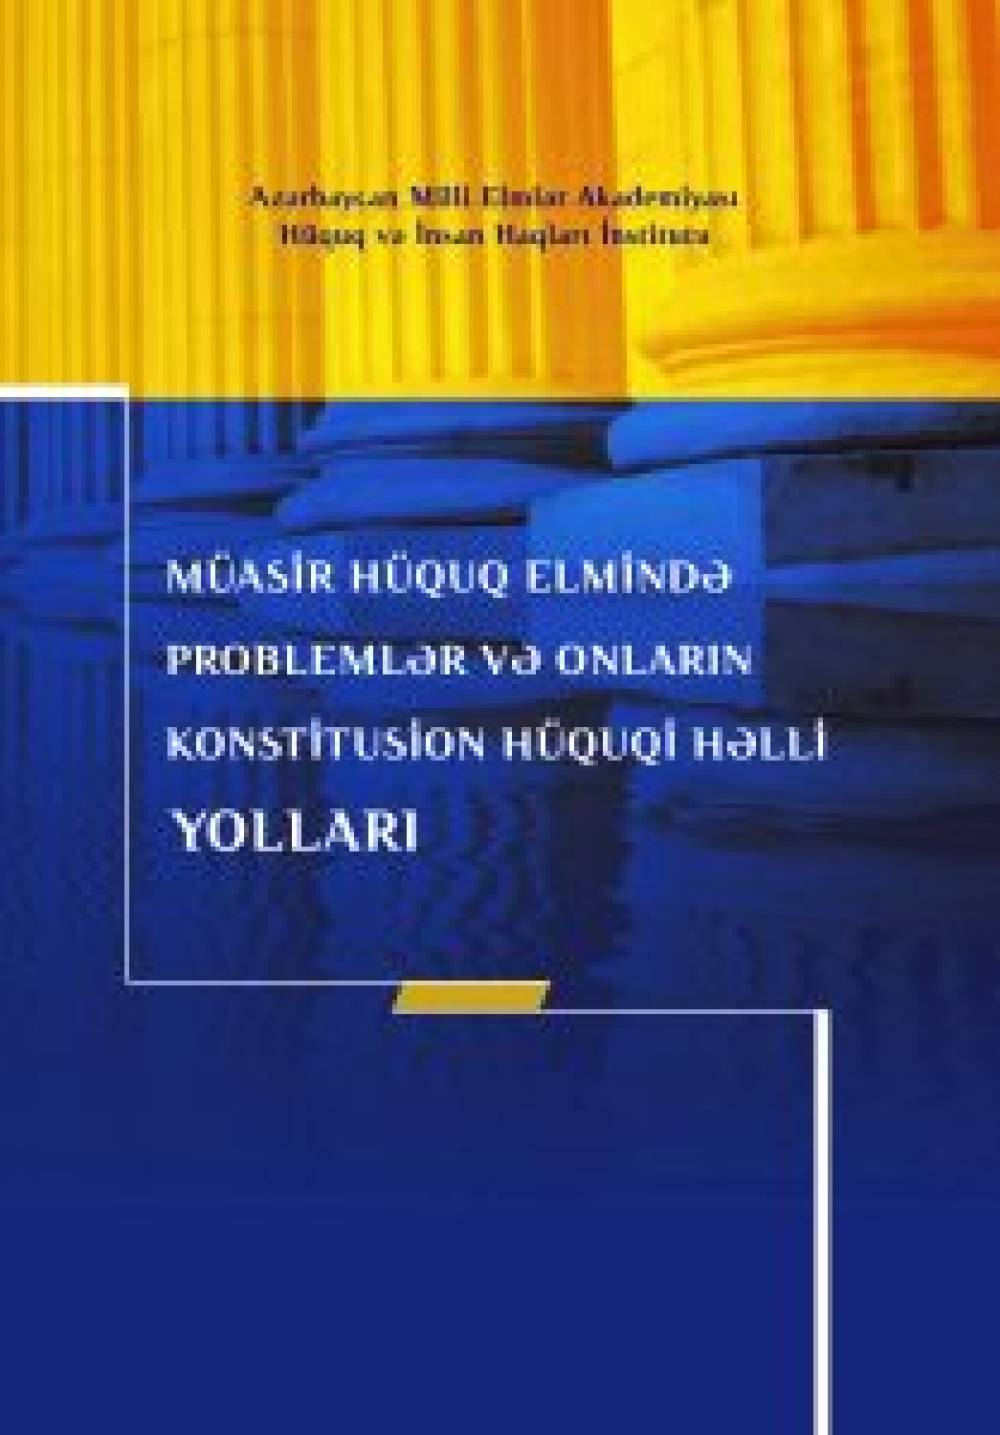 “Problems of modern legal science and their constitutional and legal solutions”